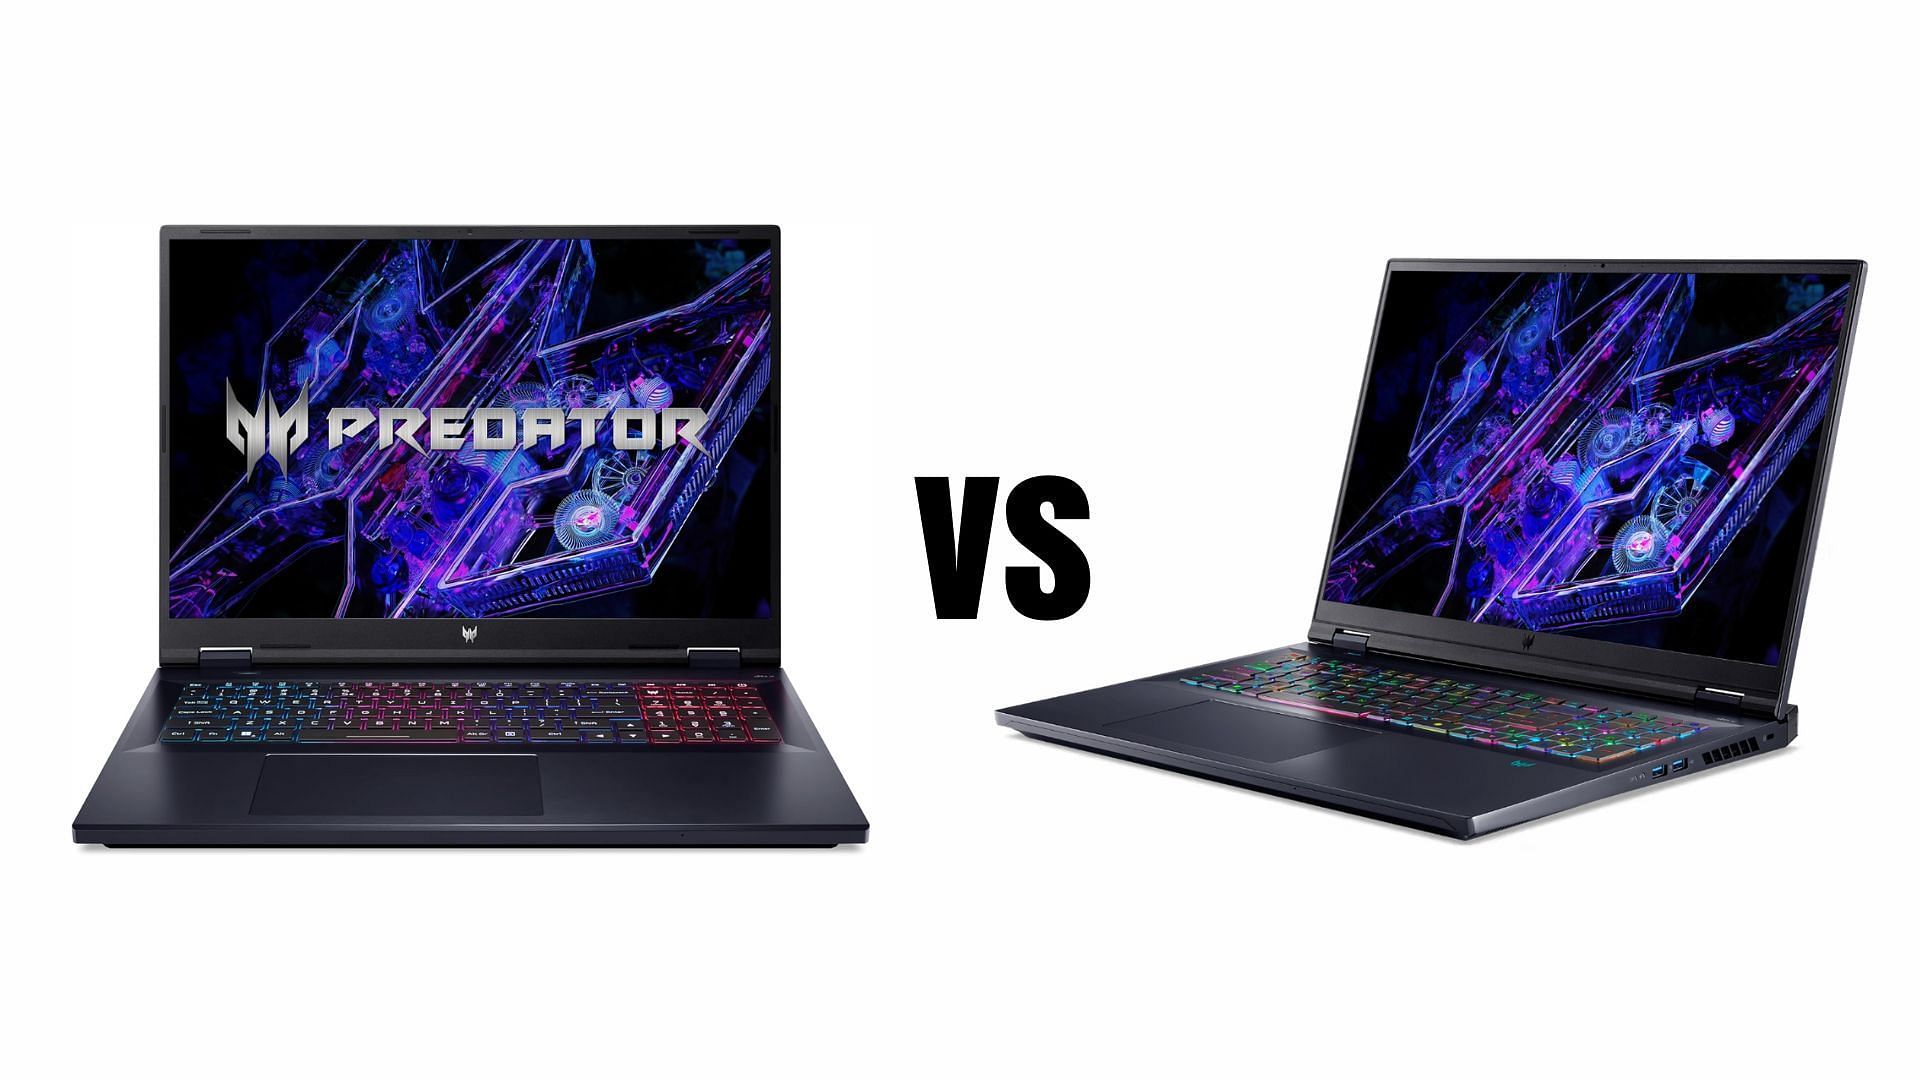 Both Acer Predator laptops offer top-of-the-line current gen hardware. (Image via Acer and Amazon)